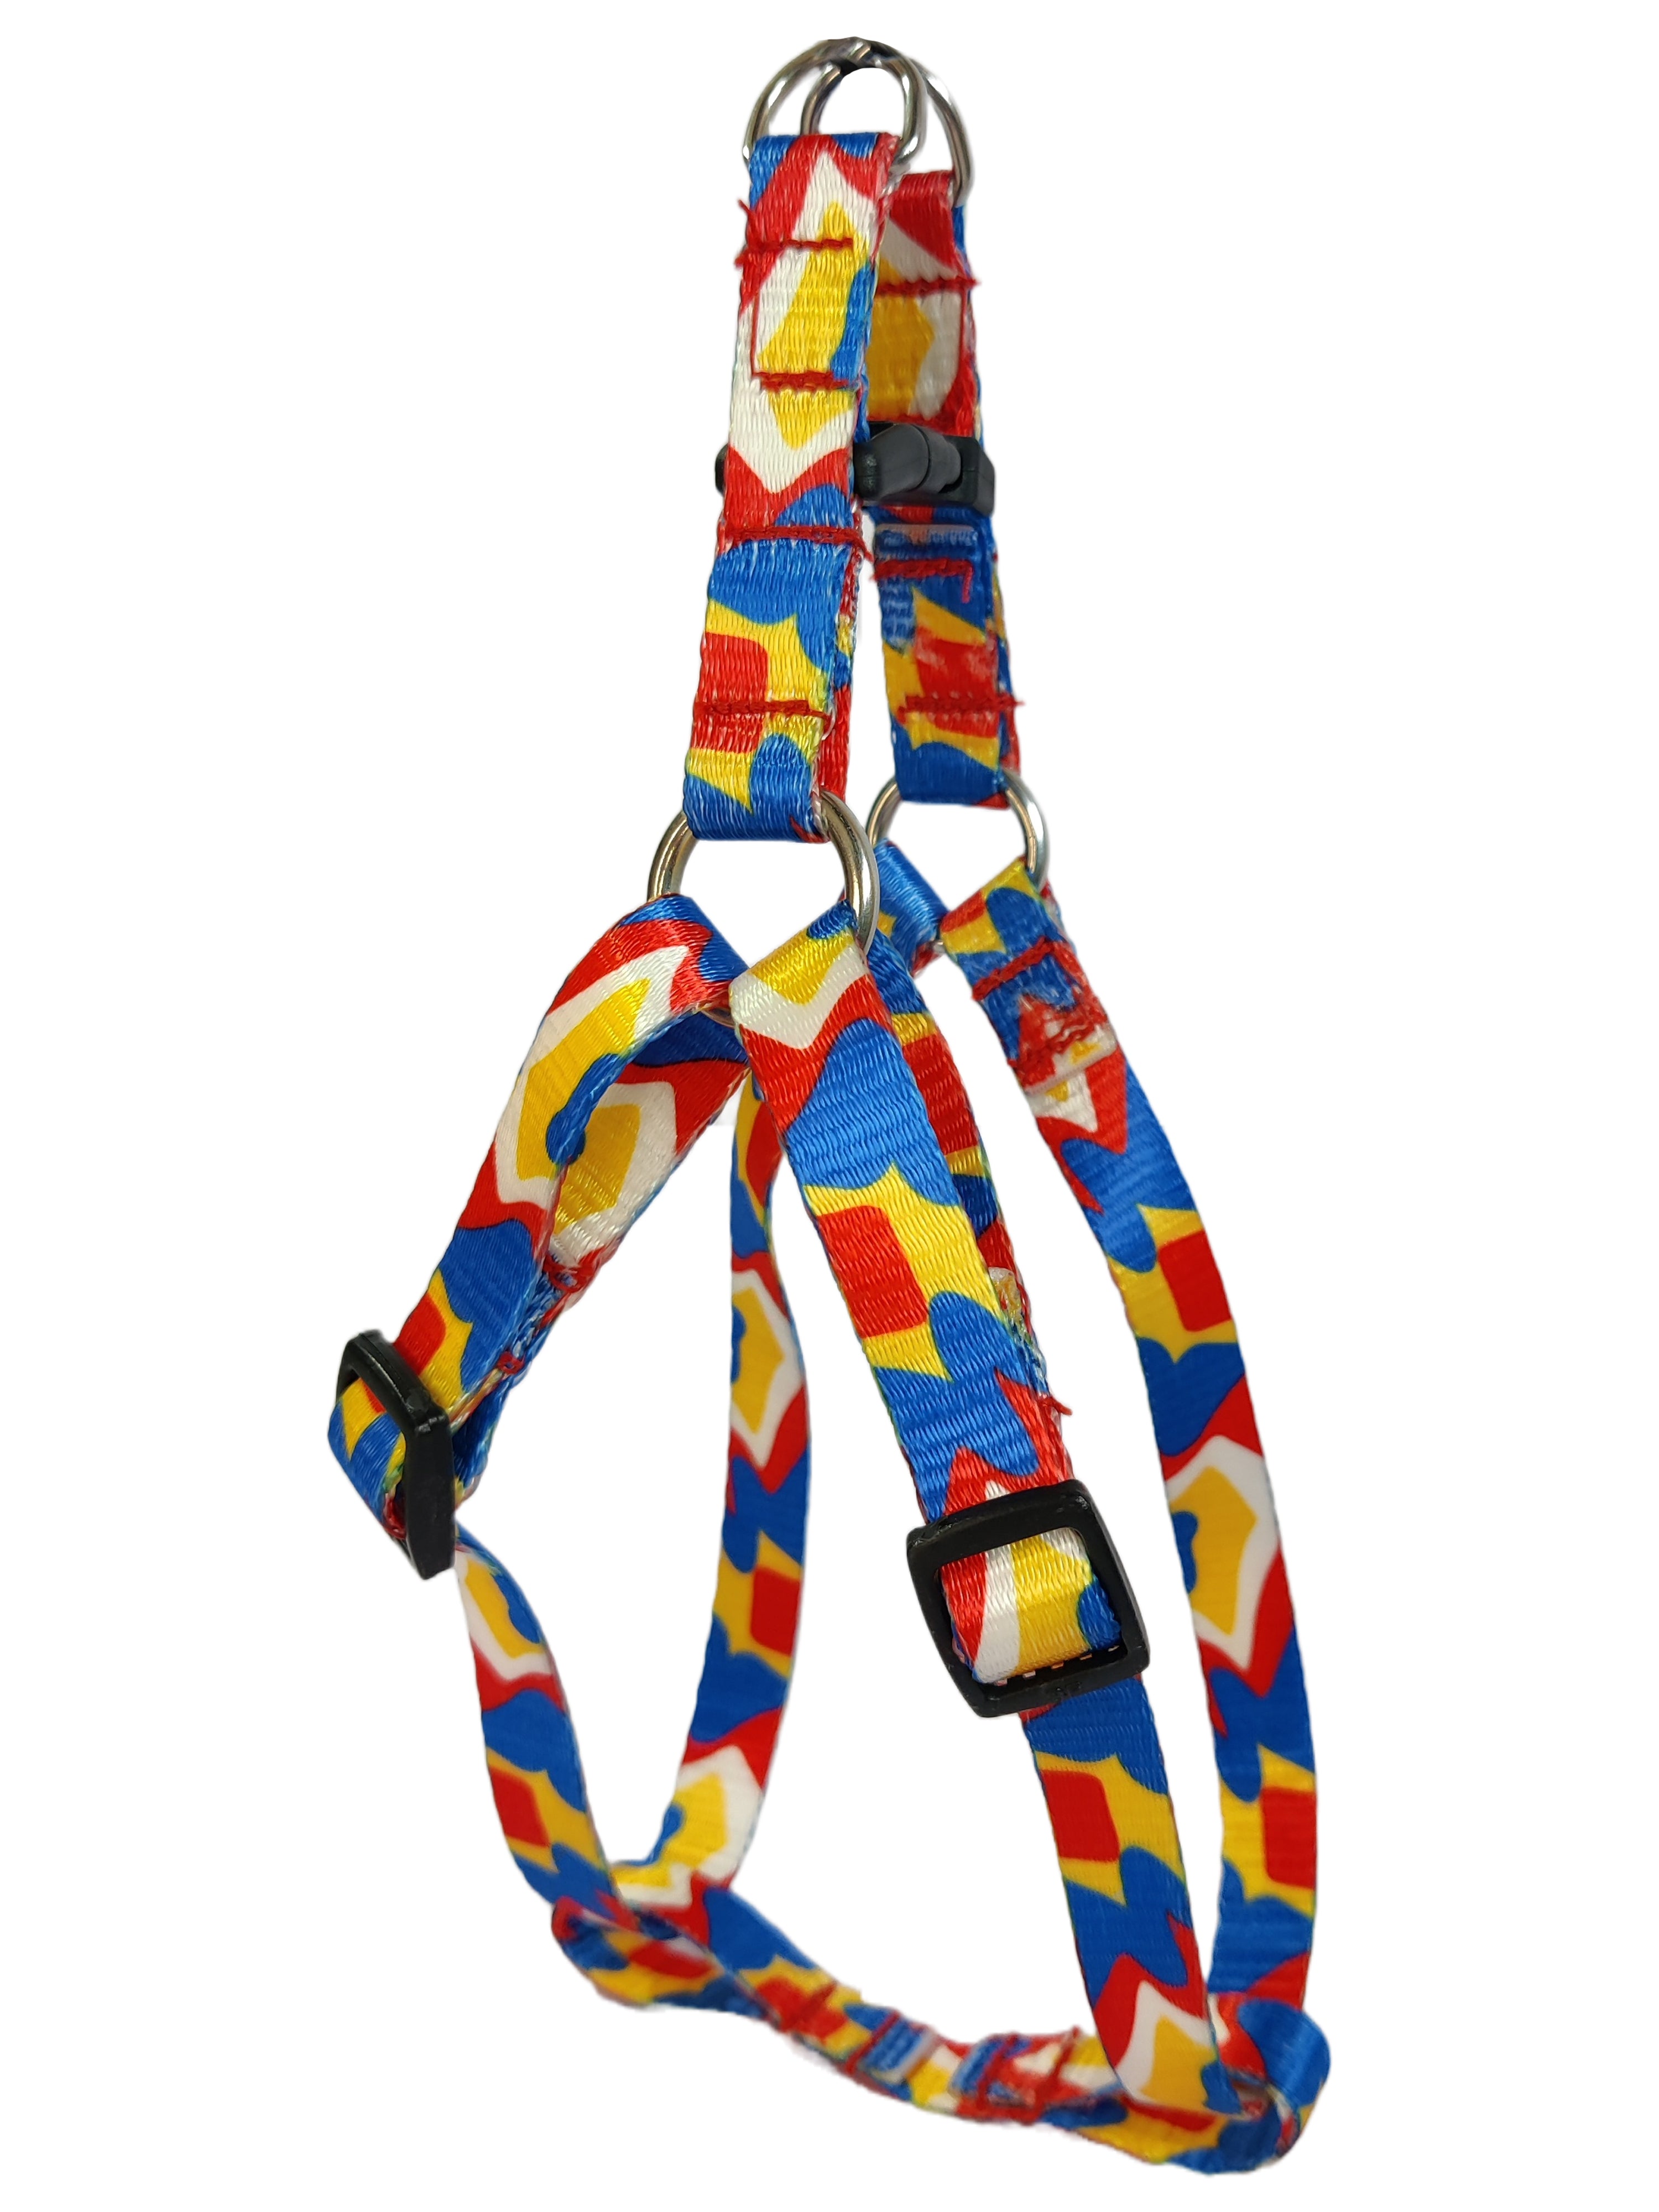 Printed polyester Harness Leash Set